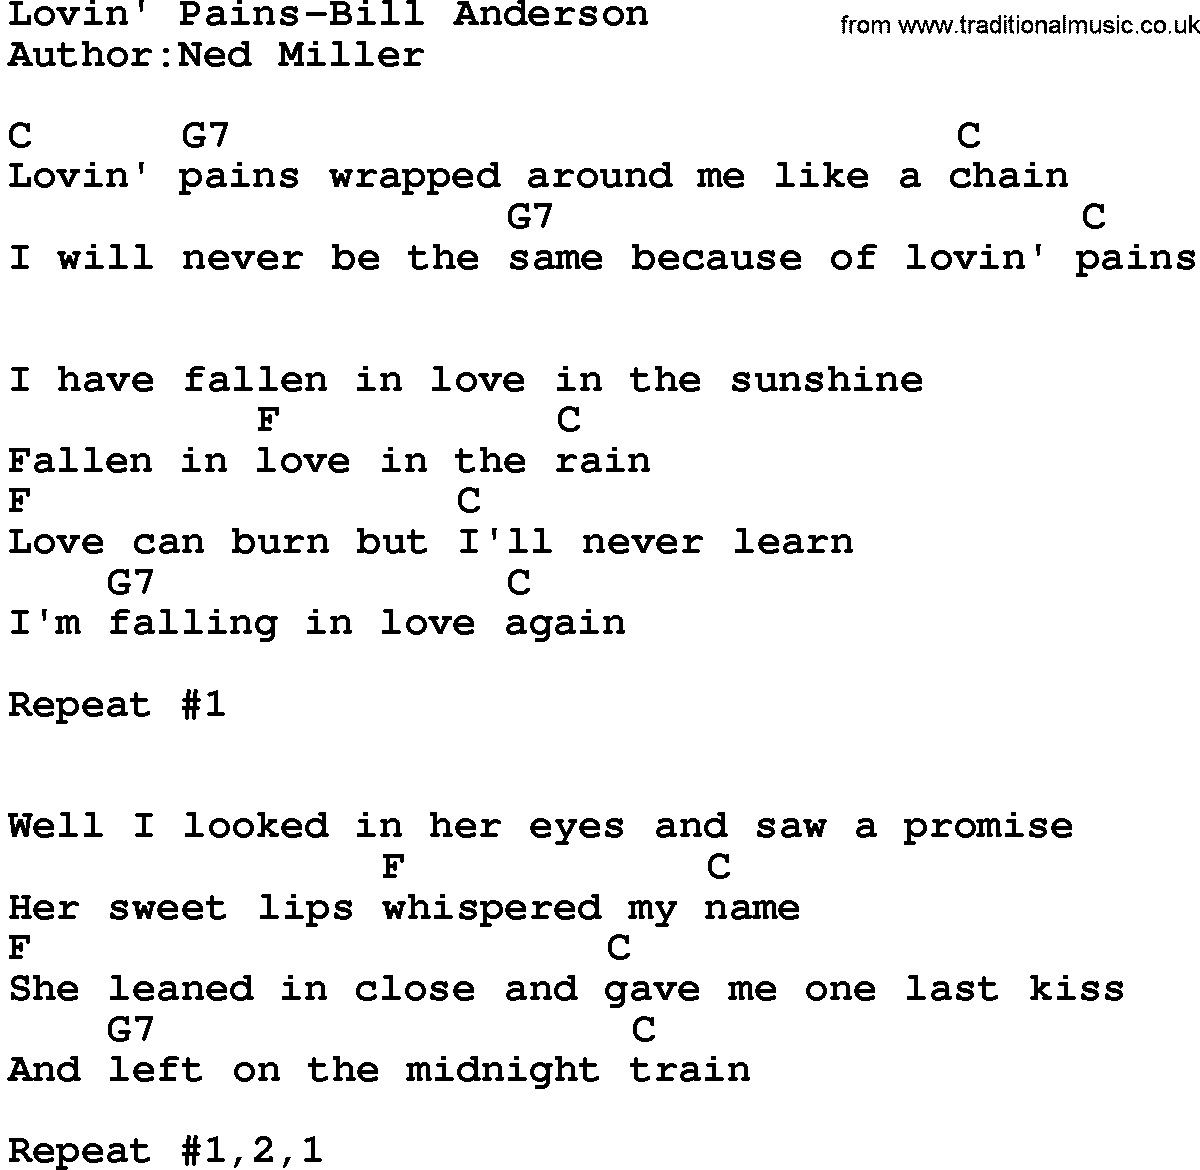 Country music song: Lovin' Pains-Bill Anderson lyrics and chords